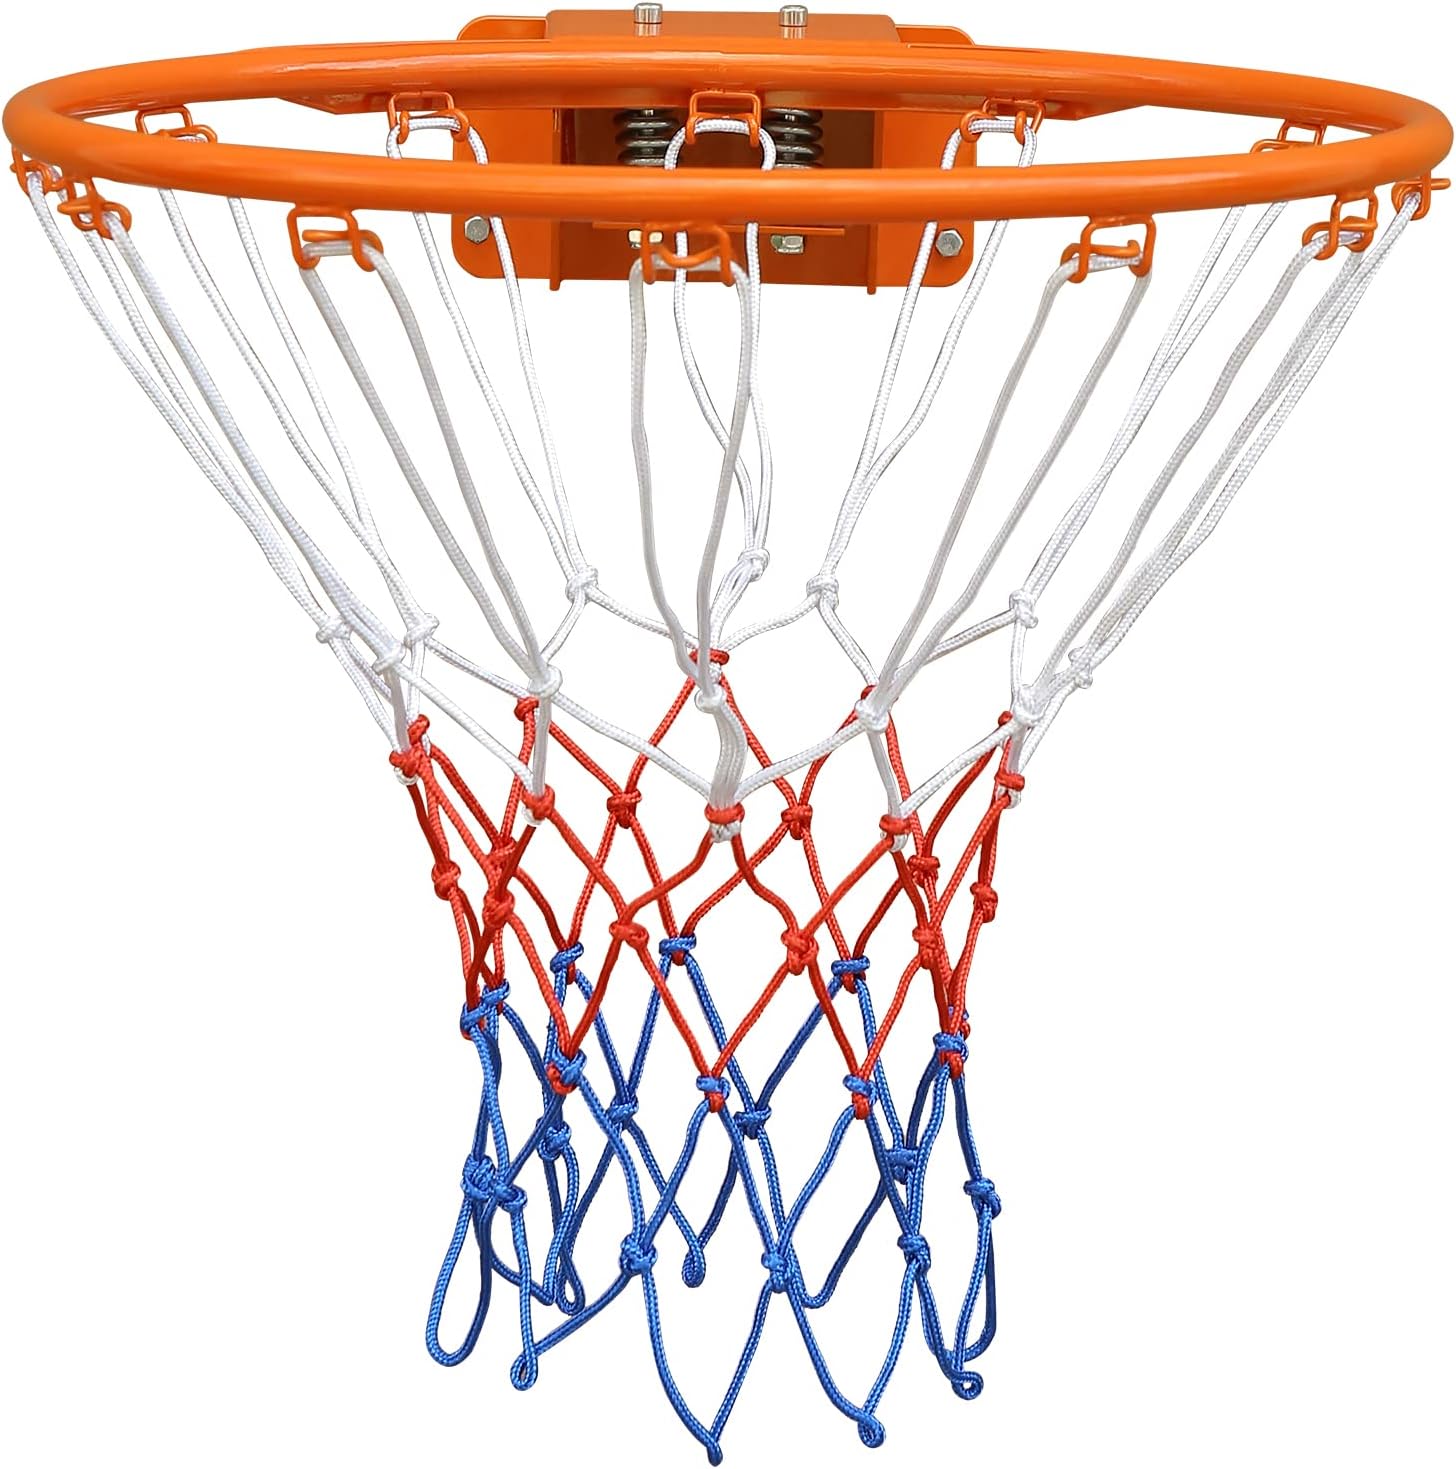 AOKUNG Basketball Double Spring Solid Rim, 18 Indoor and Outdoor